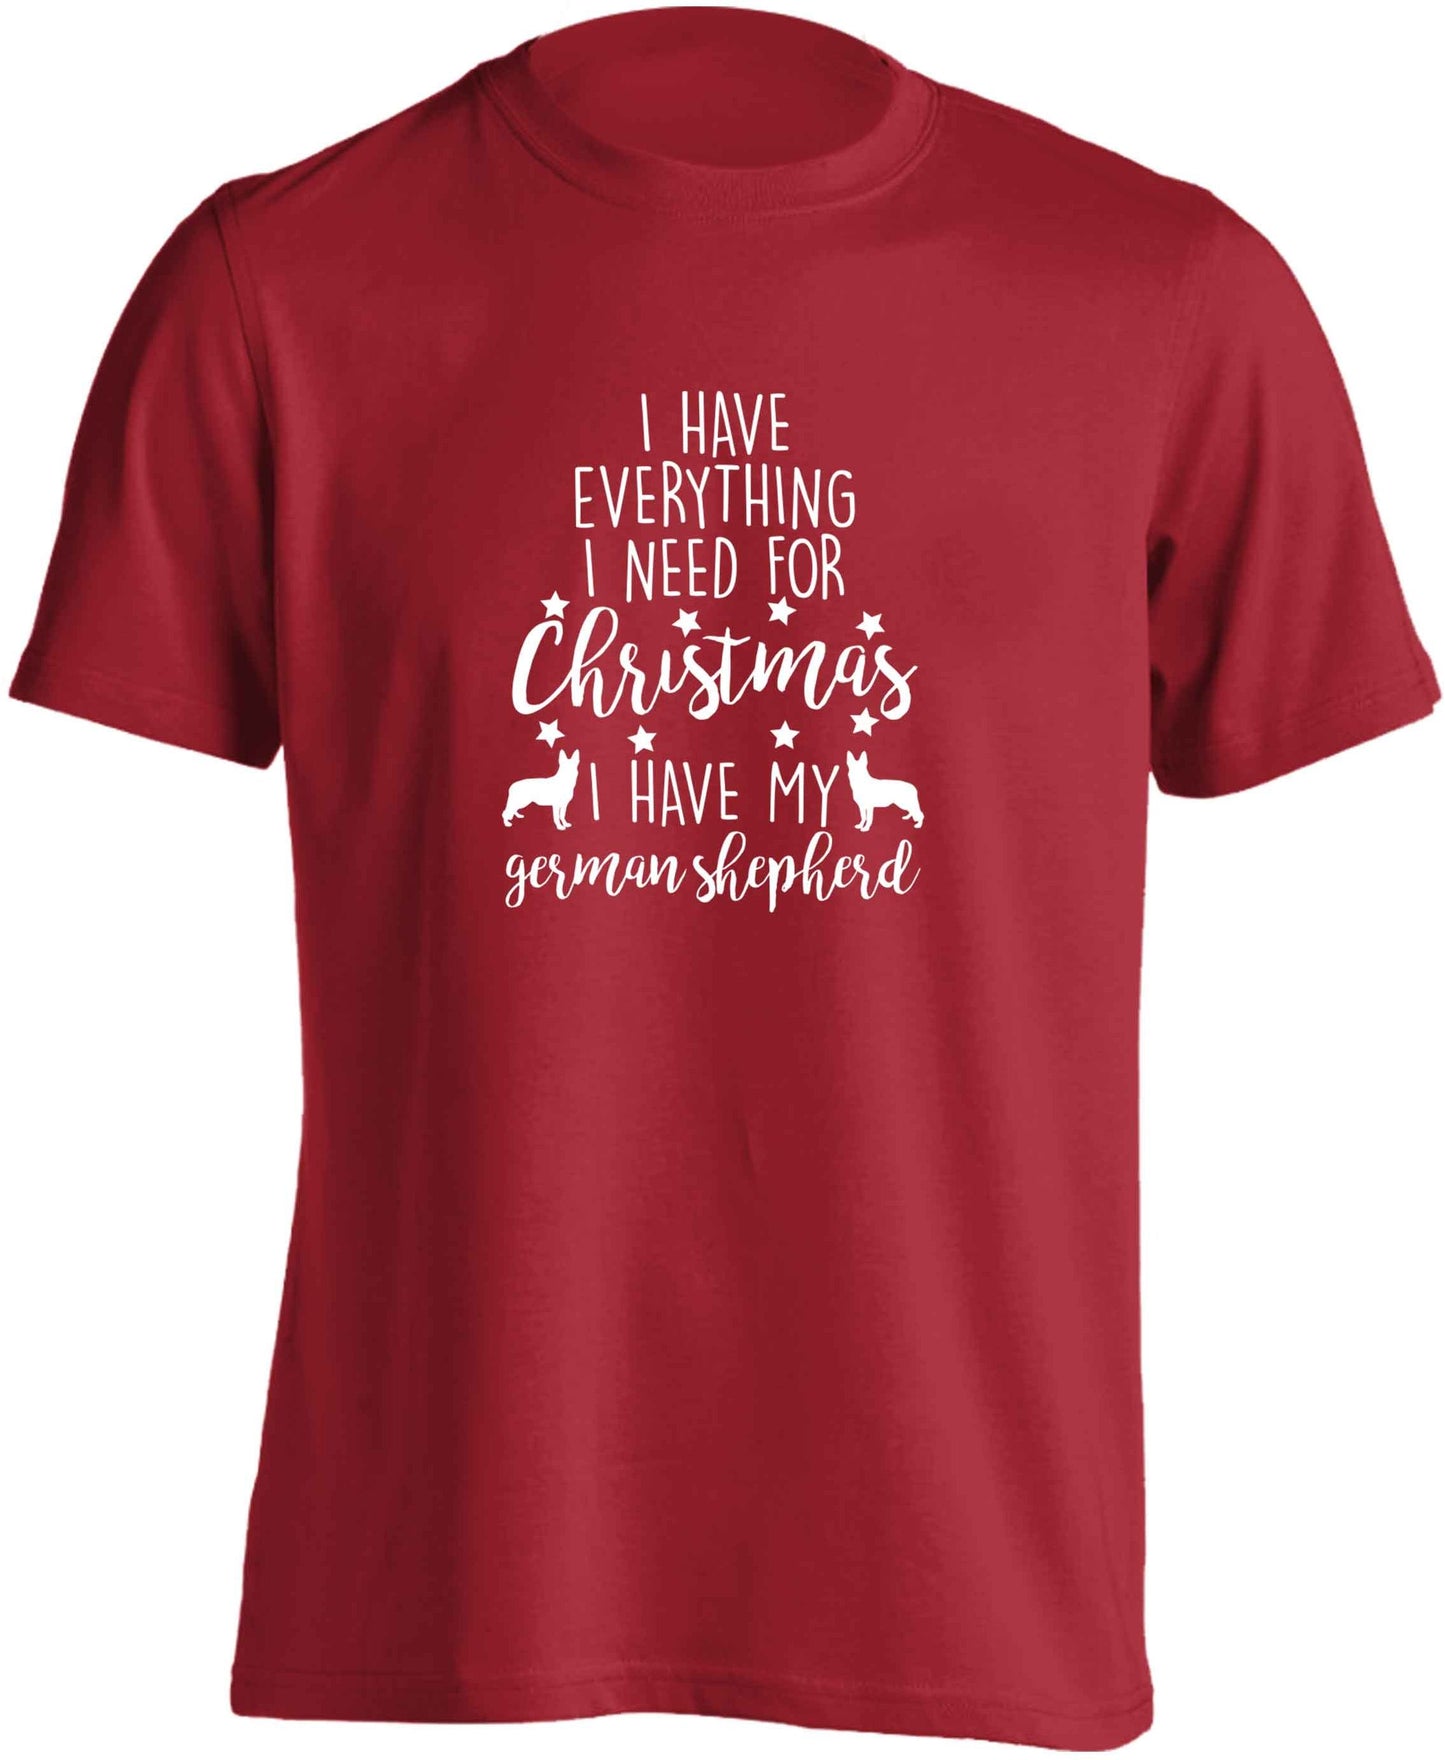 I have everything I need for Christmas I have my german shepherd adults unisex red Tshirt 2XL